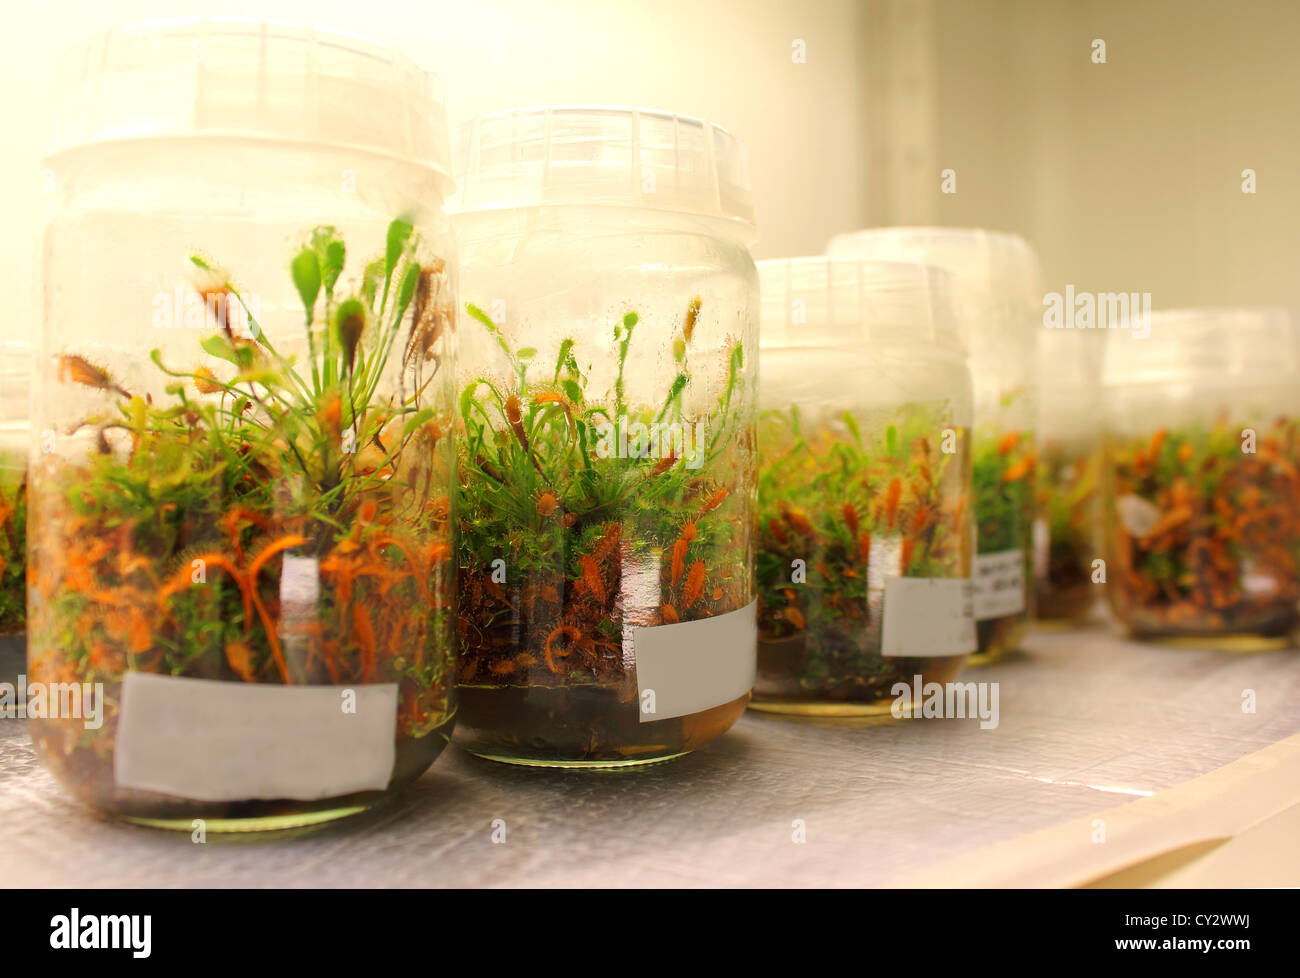 Plants in laboratory growing in special containers, Drosera rotundifolia Stock Photo